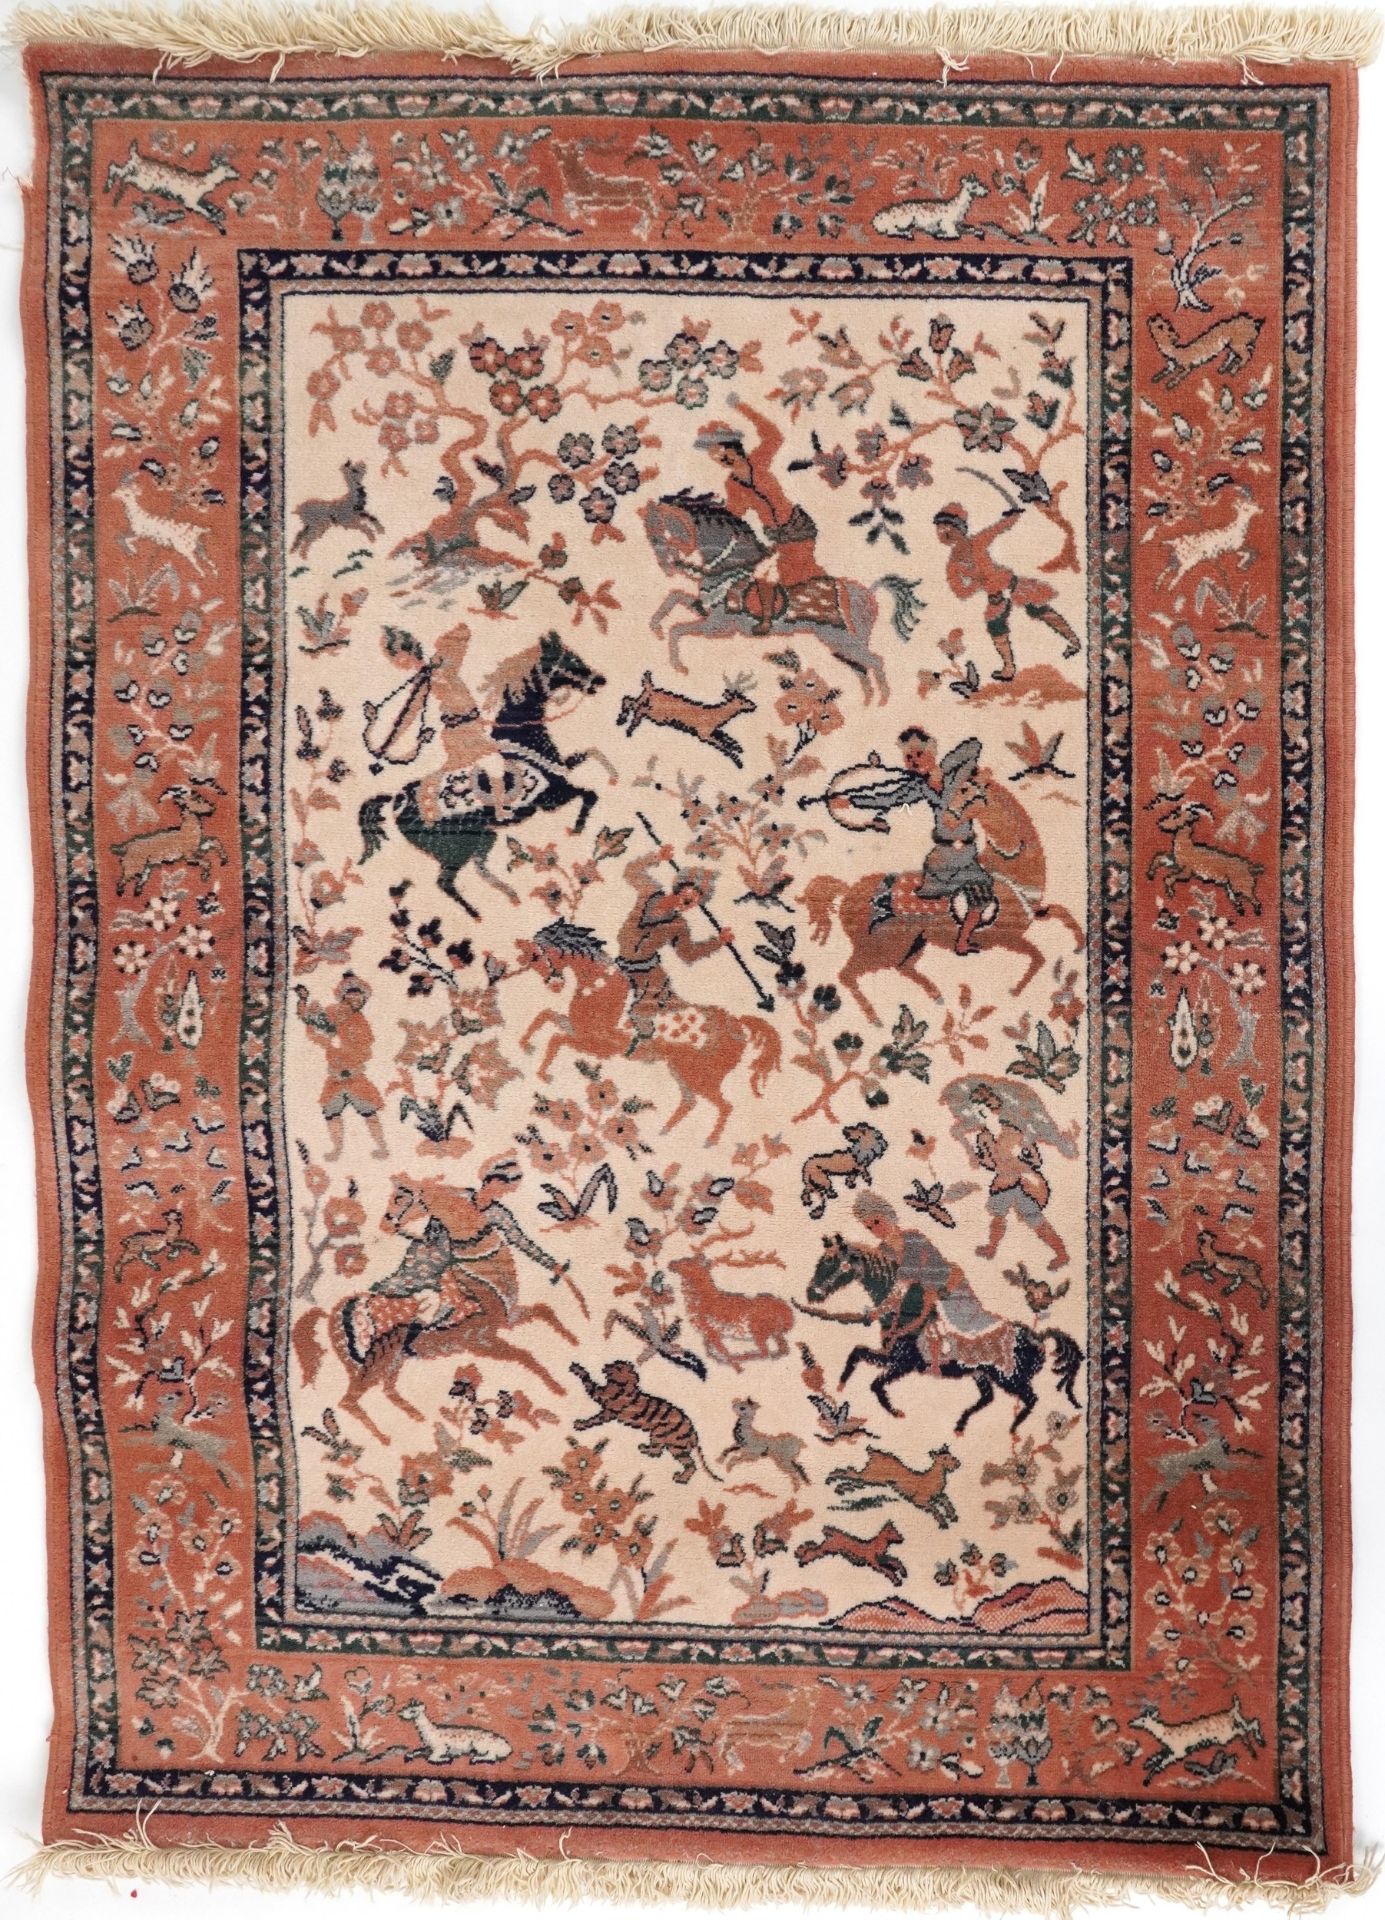 Rectangular Iranian rug decorated with warriors on horseback, 168cm x 114cm : For further